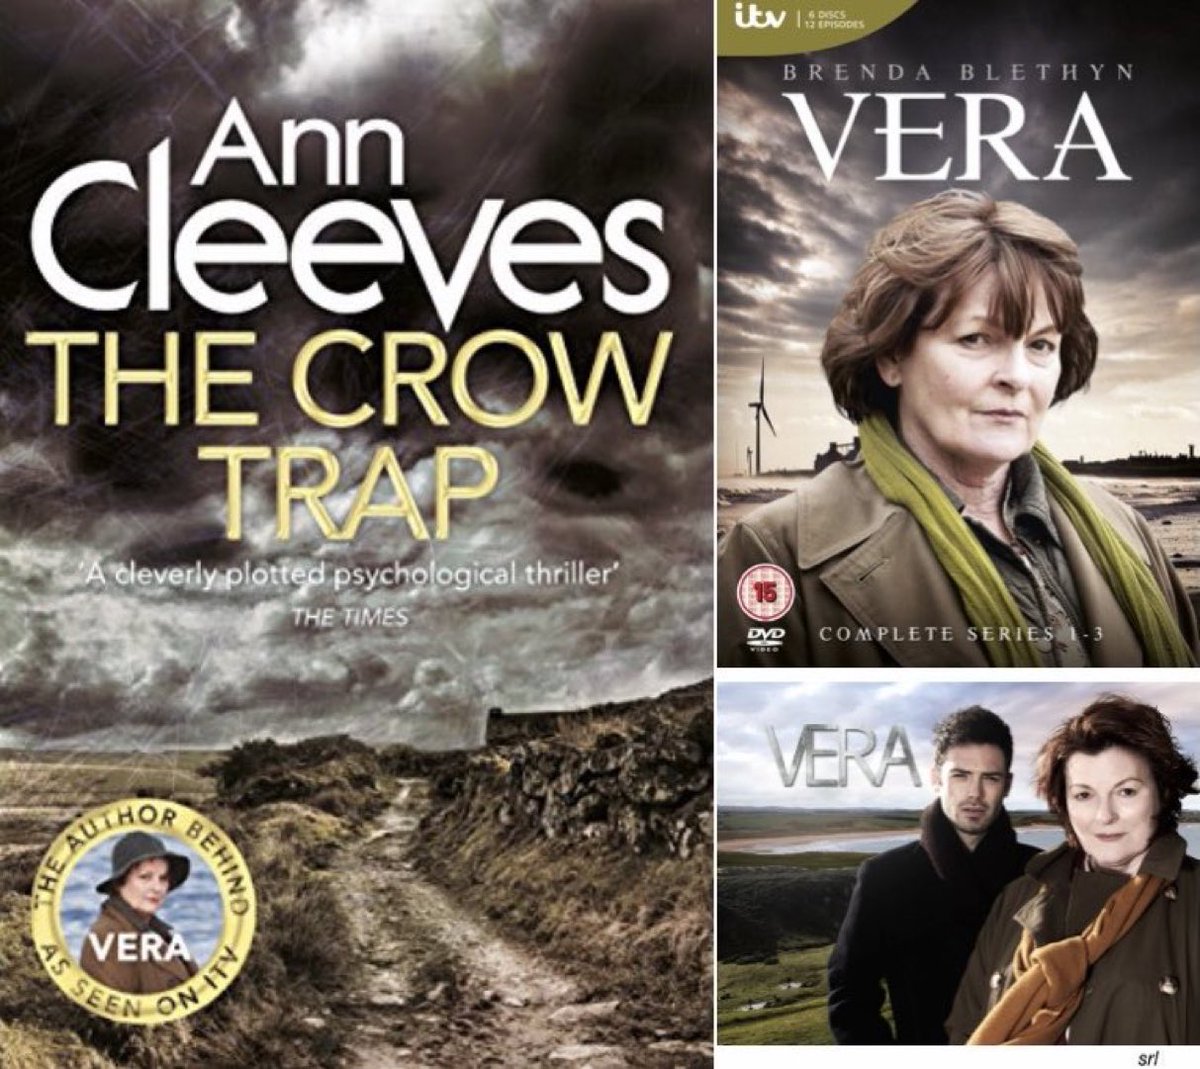 8pm TODAY on #ITV3

From 2011, s1 Ep 3 (of 4) of the #Crime series📺 #Vera -  “The Crow Trap” directed by #FarrenBlackburn & written by #StephenBrady

Based on the 1999 novel📖 by @AnnCleeves 

🌟#BrendaBlethyn #DavidLeon #WunmiMosaku #JonMorrison #PaulRitter